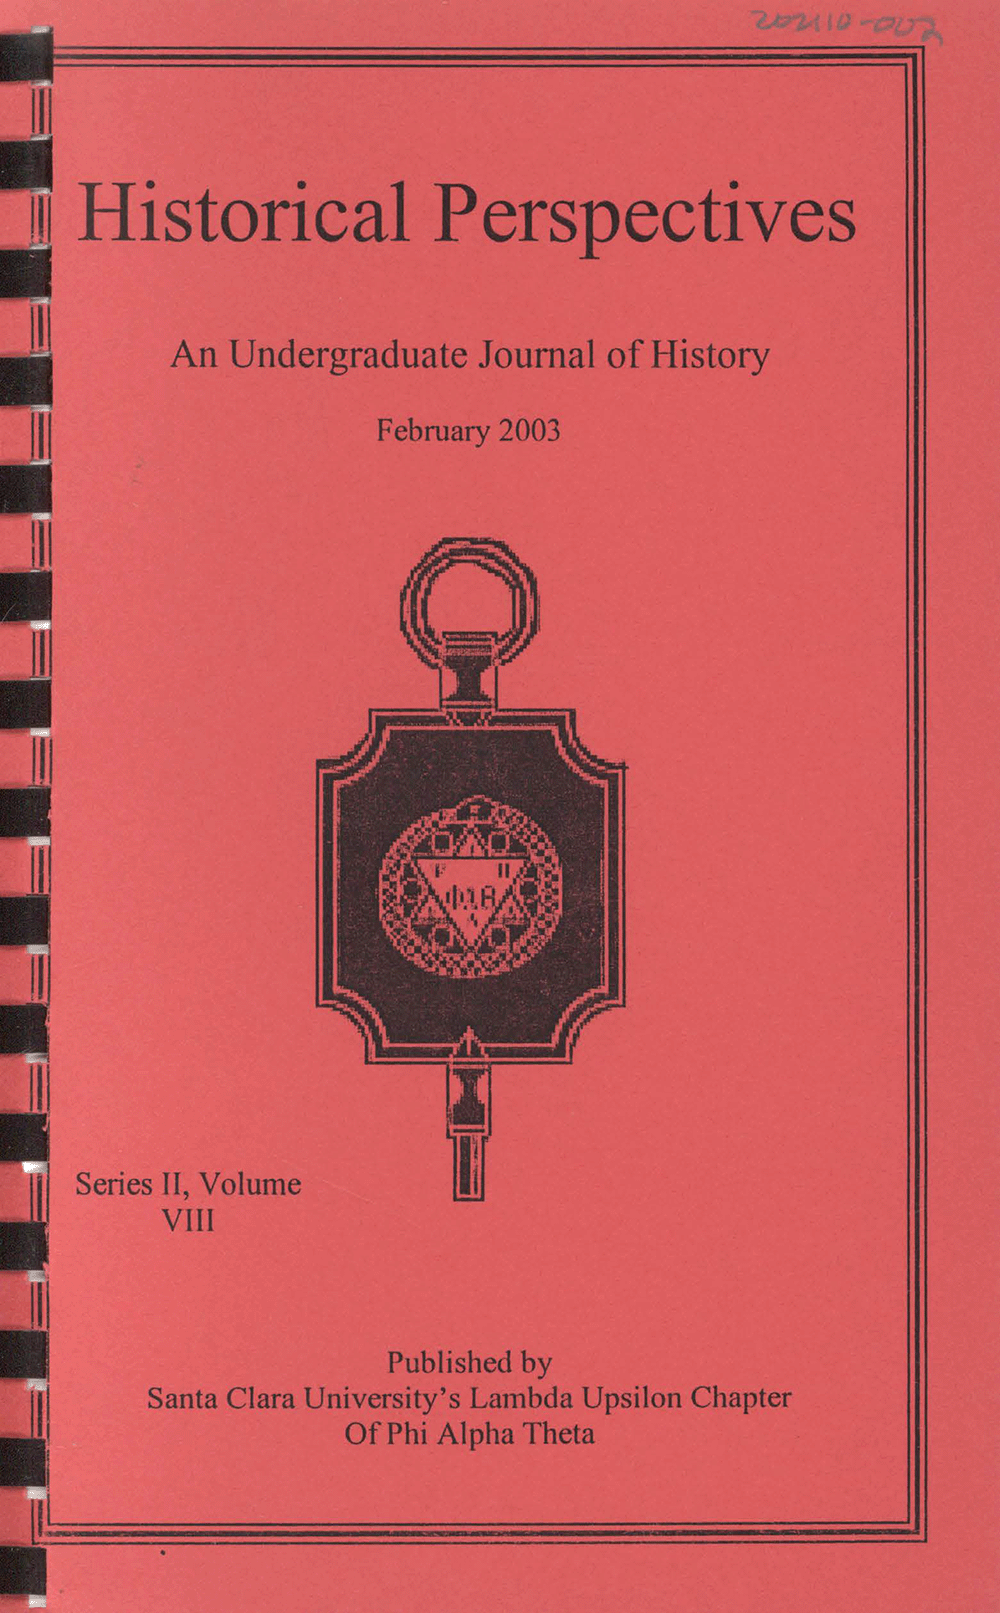 Historical Perspectives 2003, volume 8